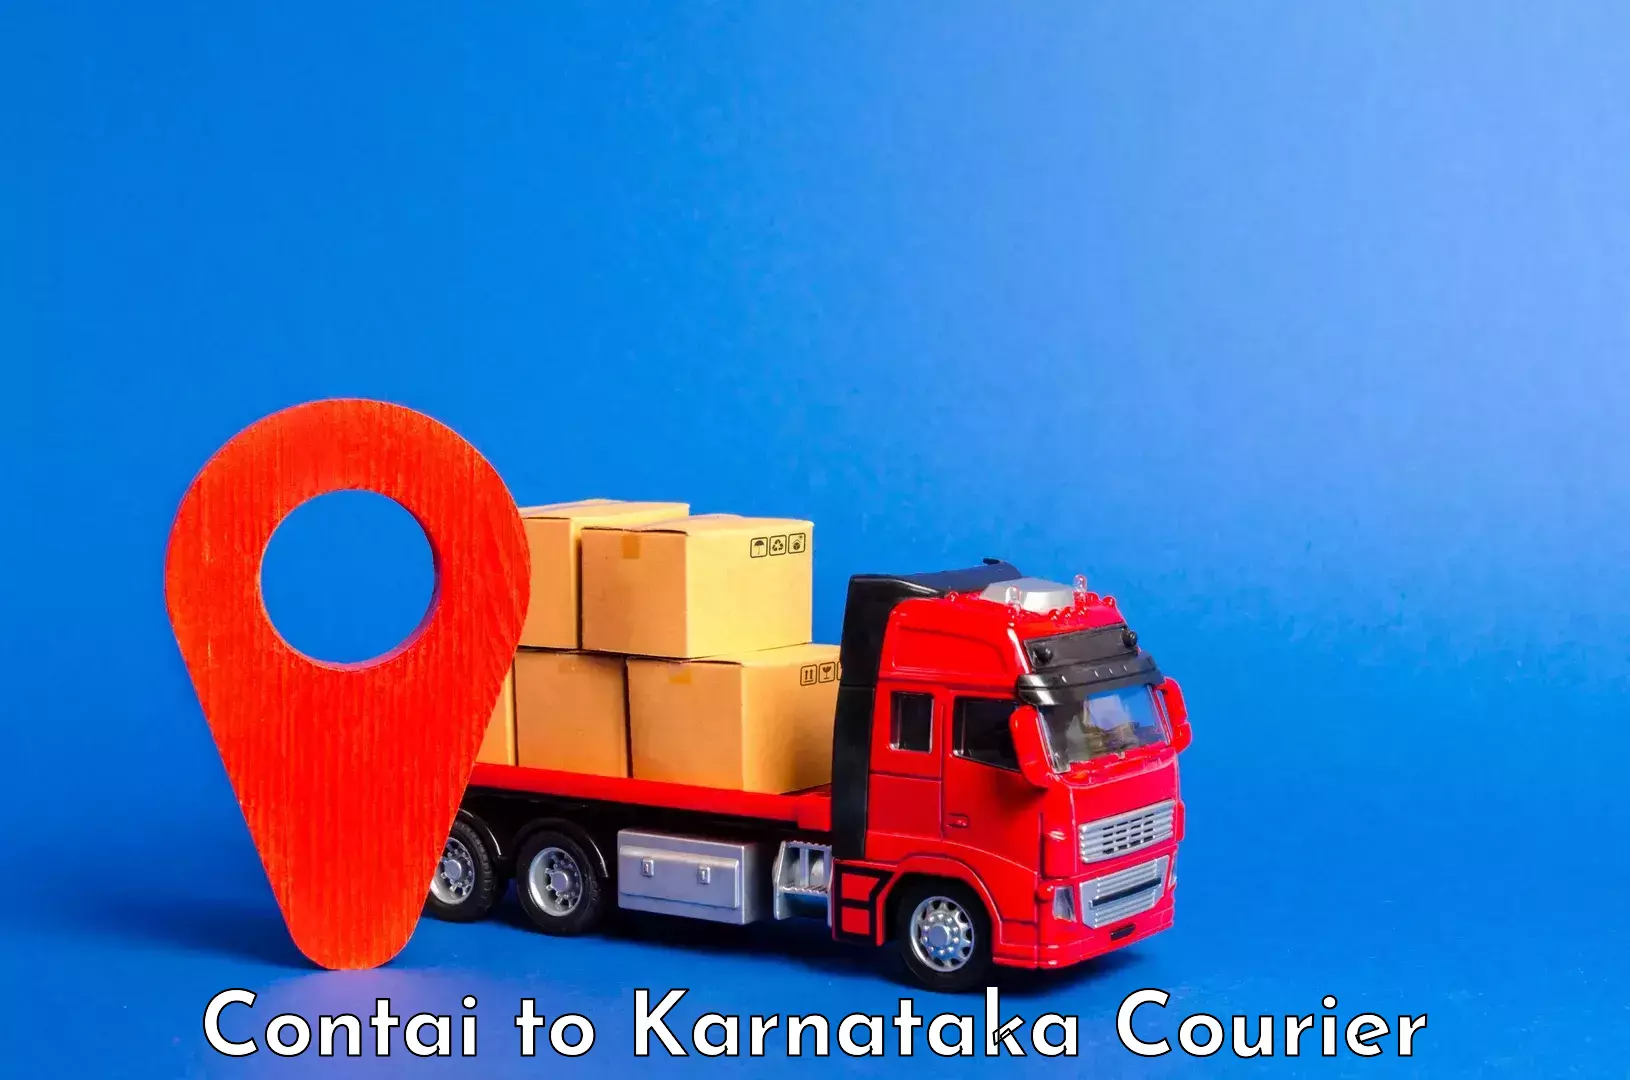 Luggage shipment tracking Contai to Jagalur